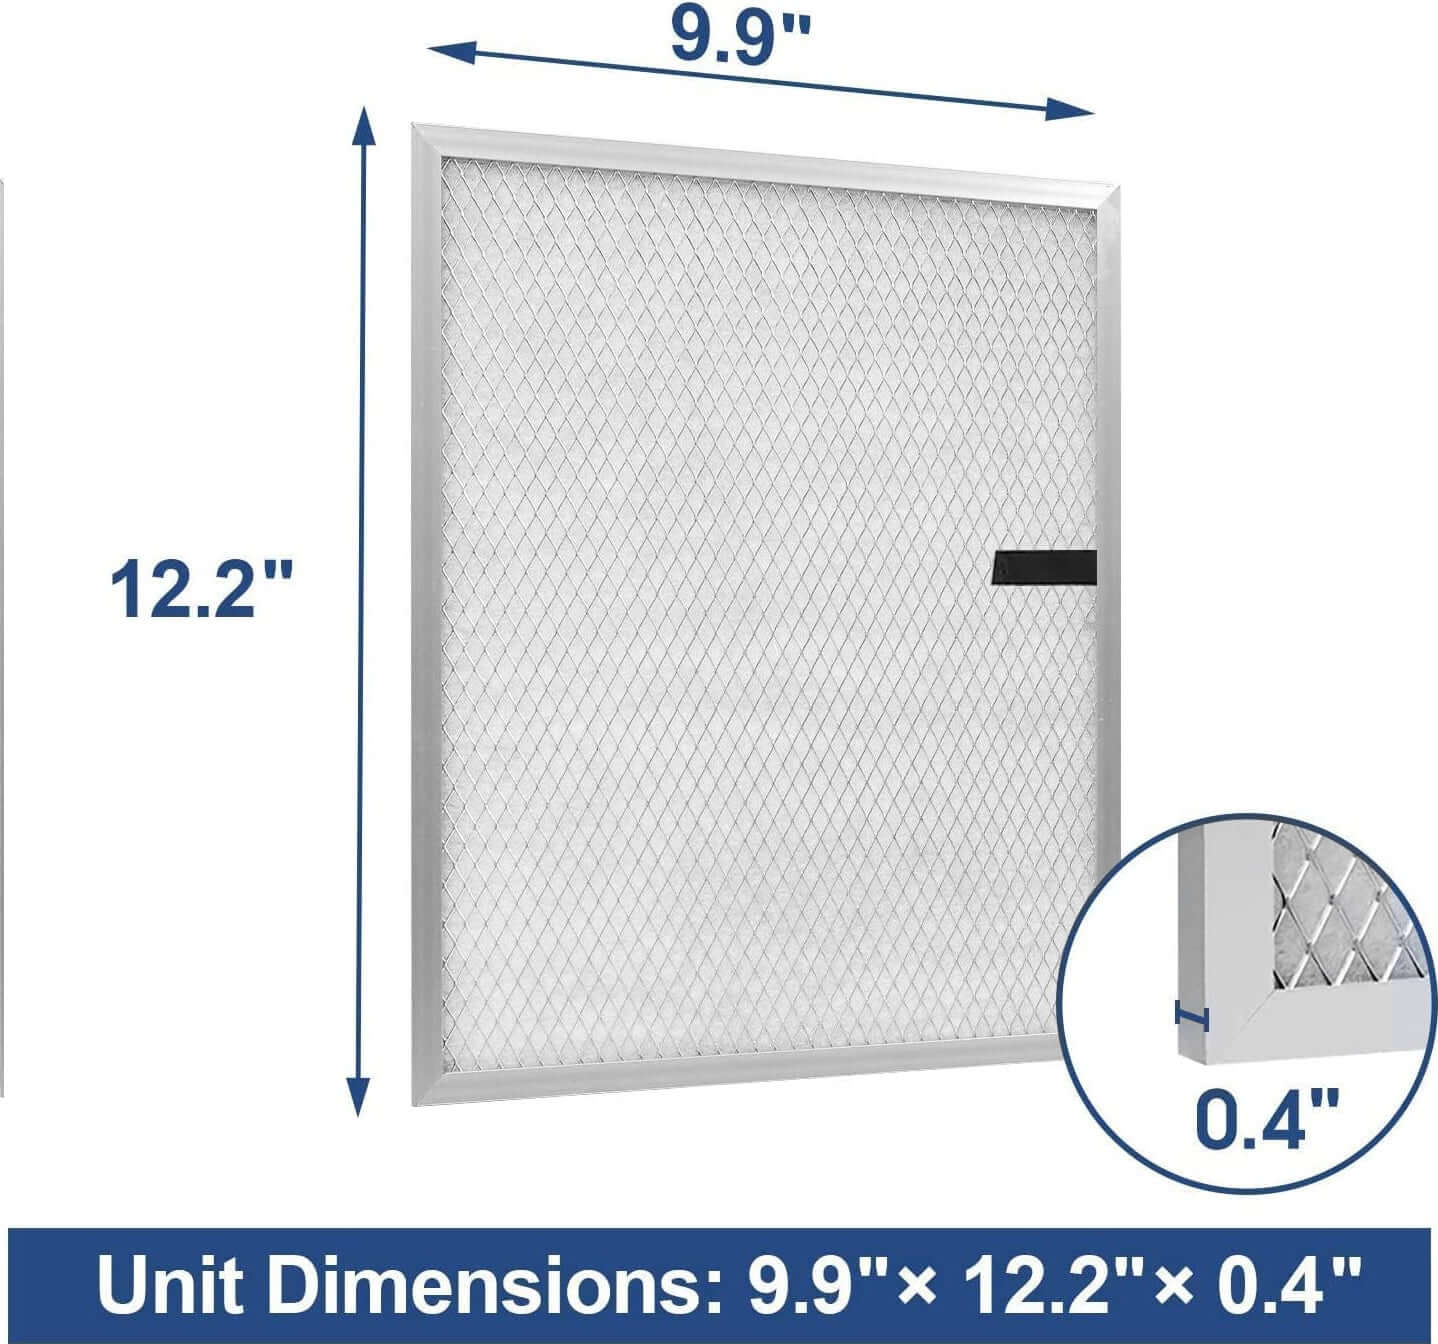 Enhanced Air Filtration for your AlorAir Storm LGR Extreme Commercial Dehumidifier with Merv-8 Filter's 9.9"x12.2"x0.4" Dimensions